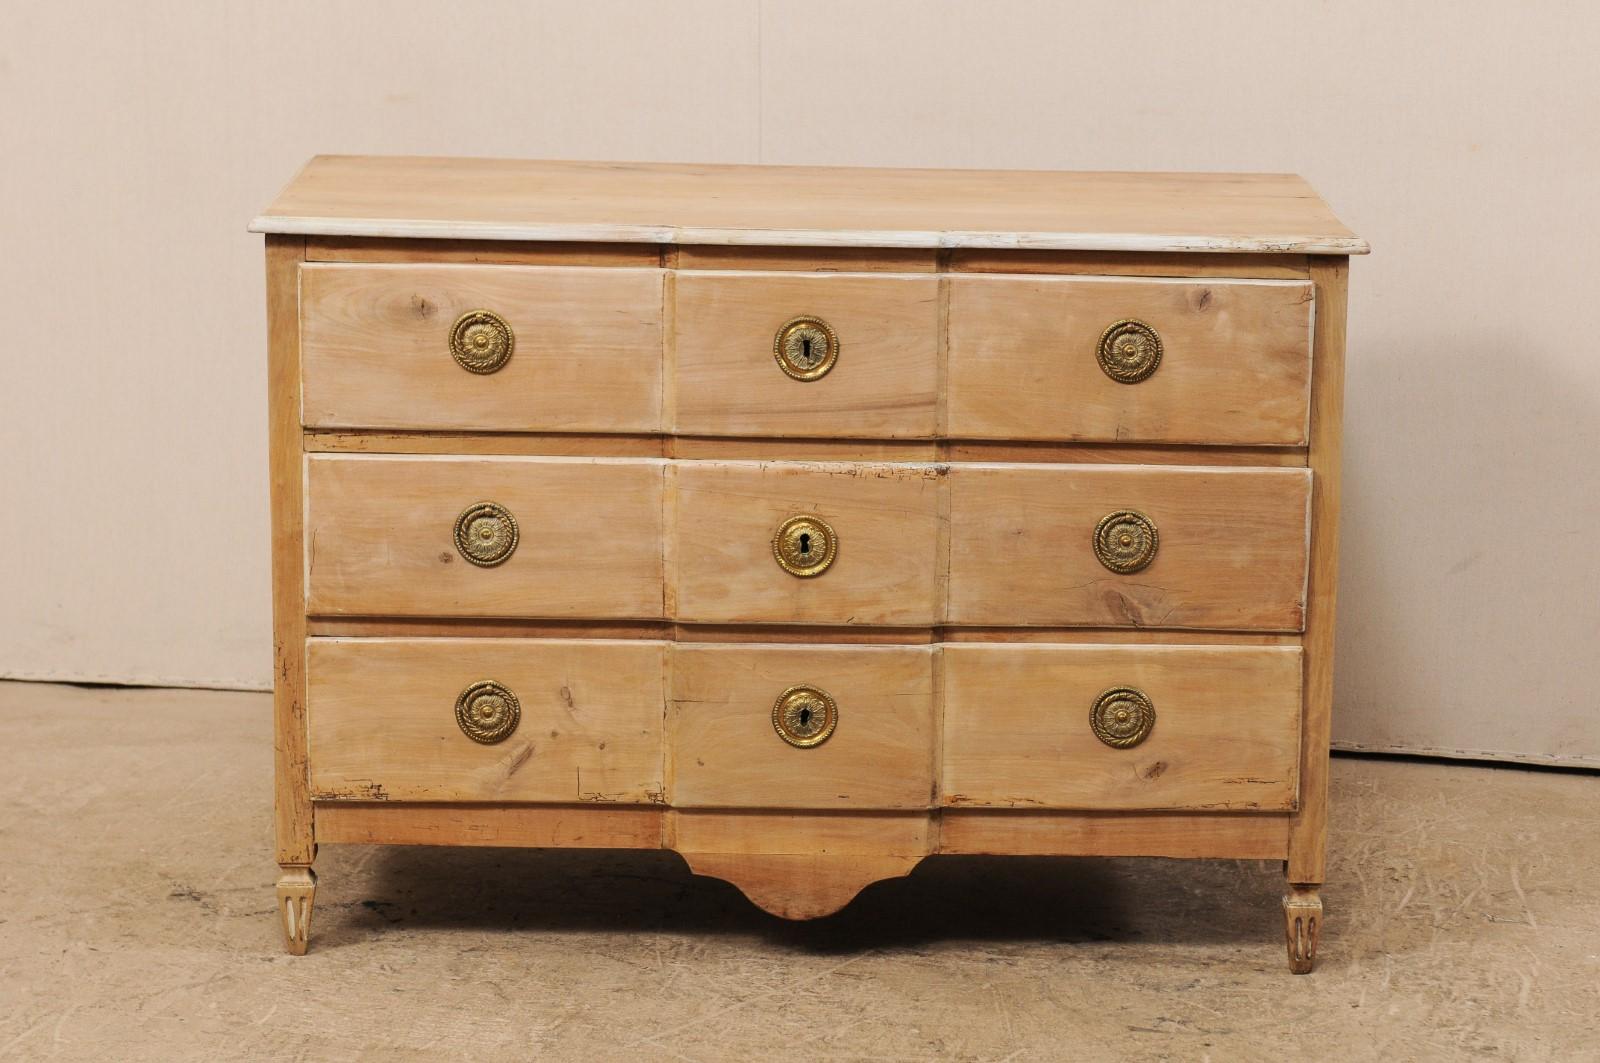 Carved 18th Century French Pale Wood Three-Drawer Chest with Painted Trim